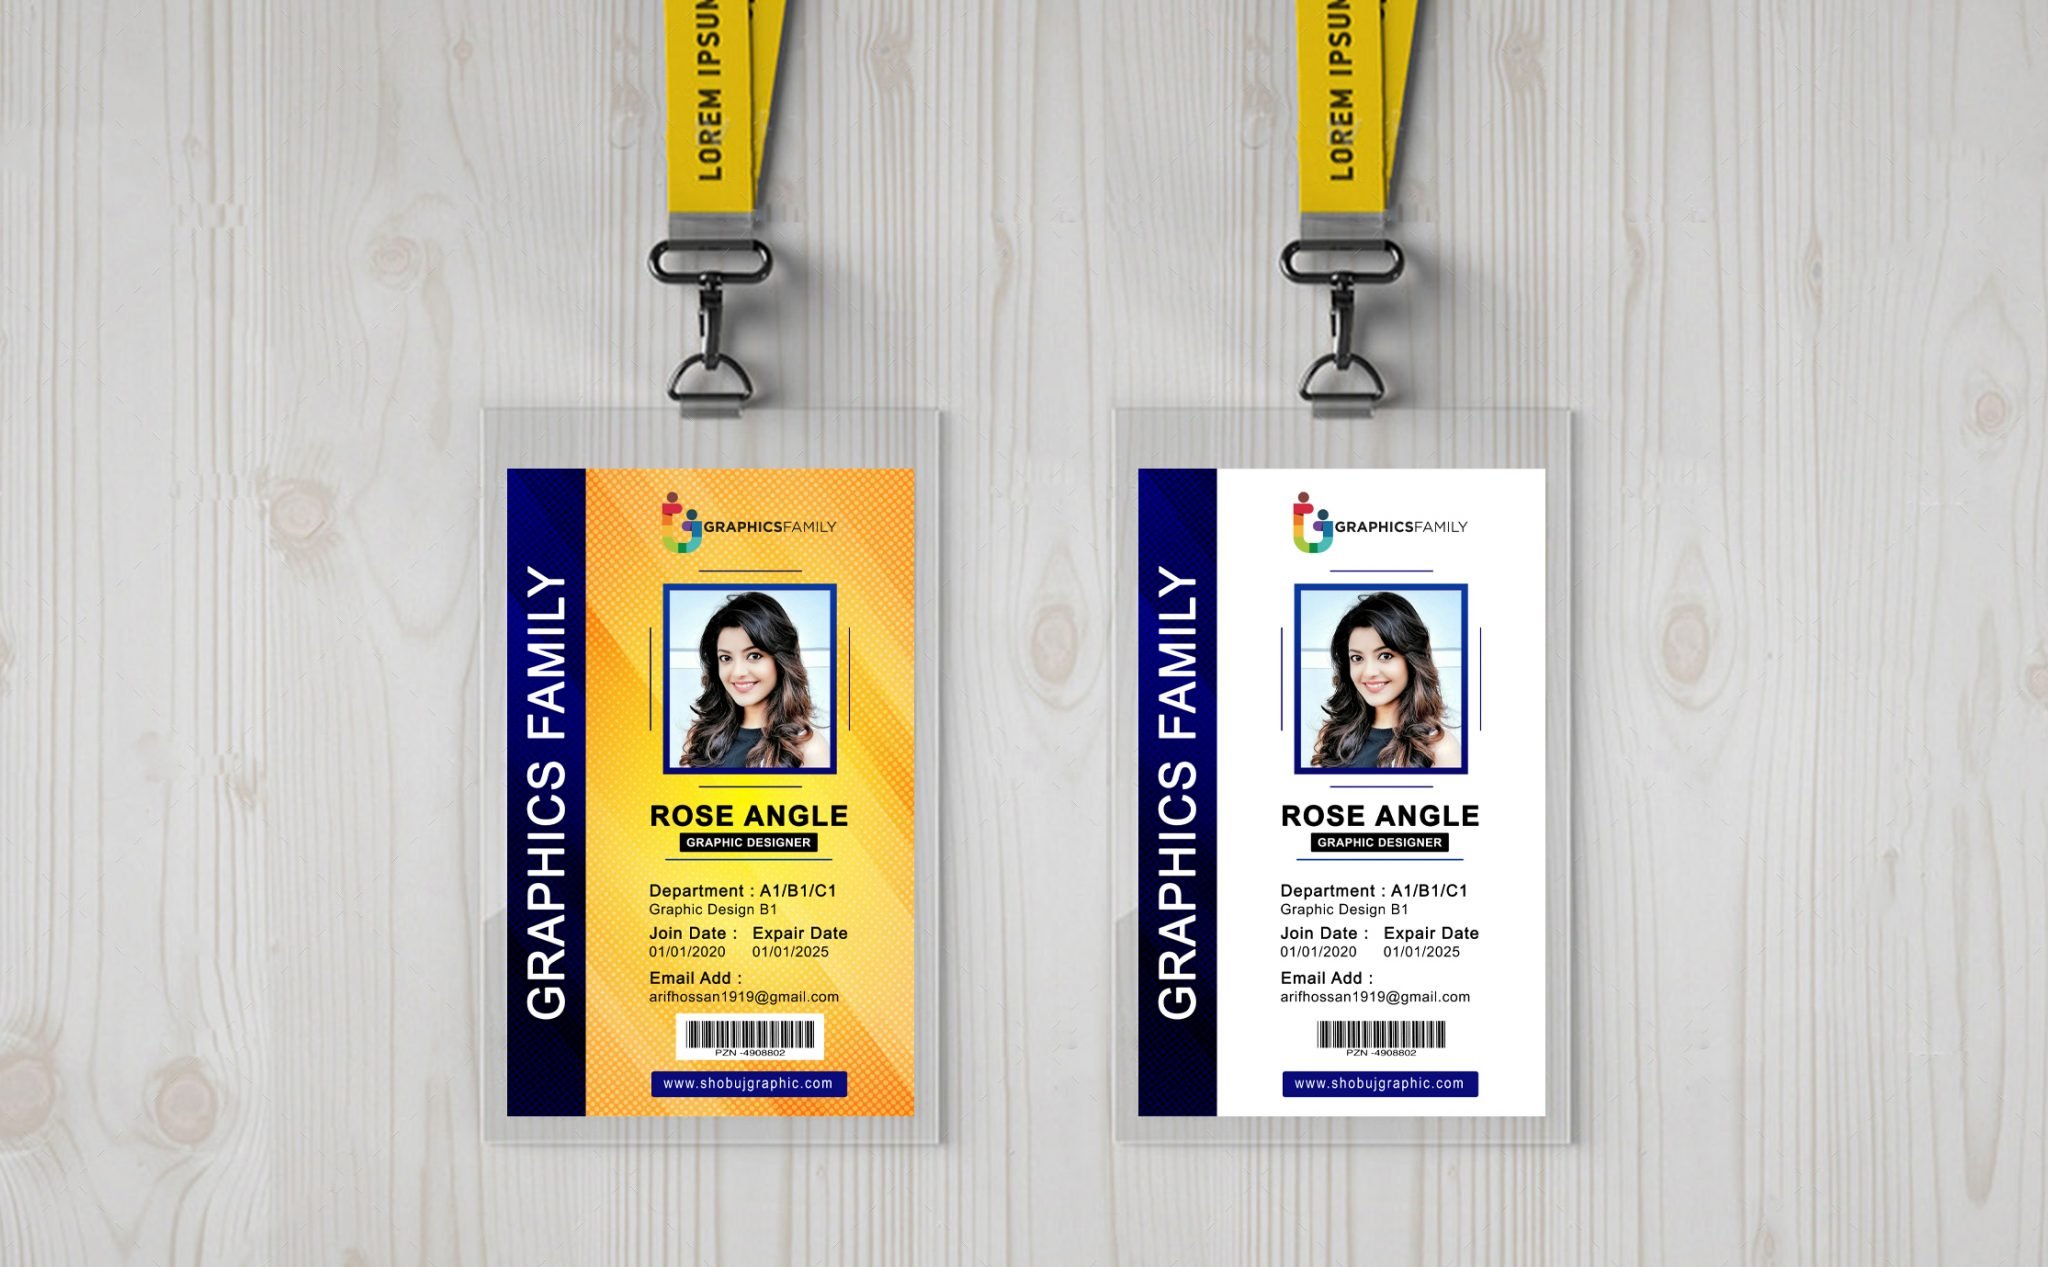 Free Employee Vertical Id Card Design GraphicsFamily